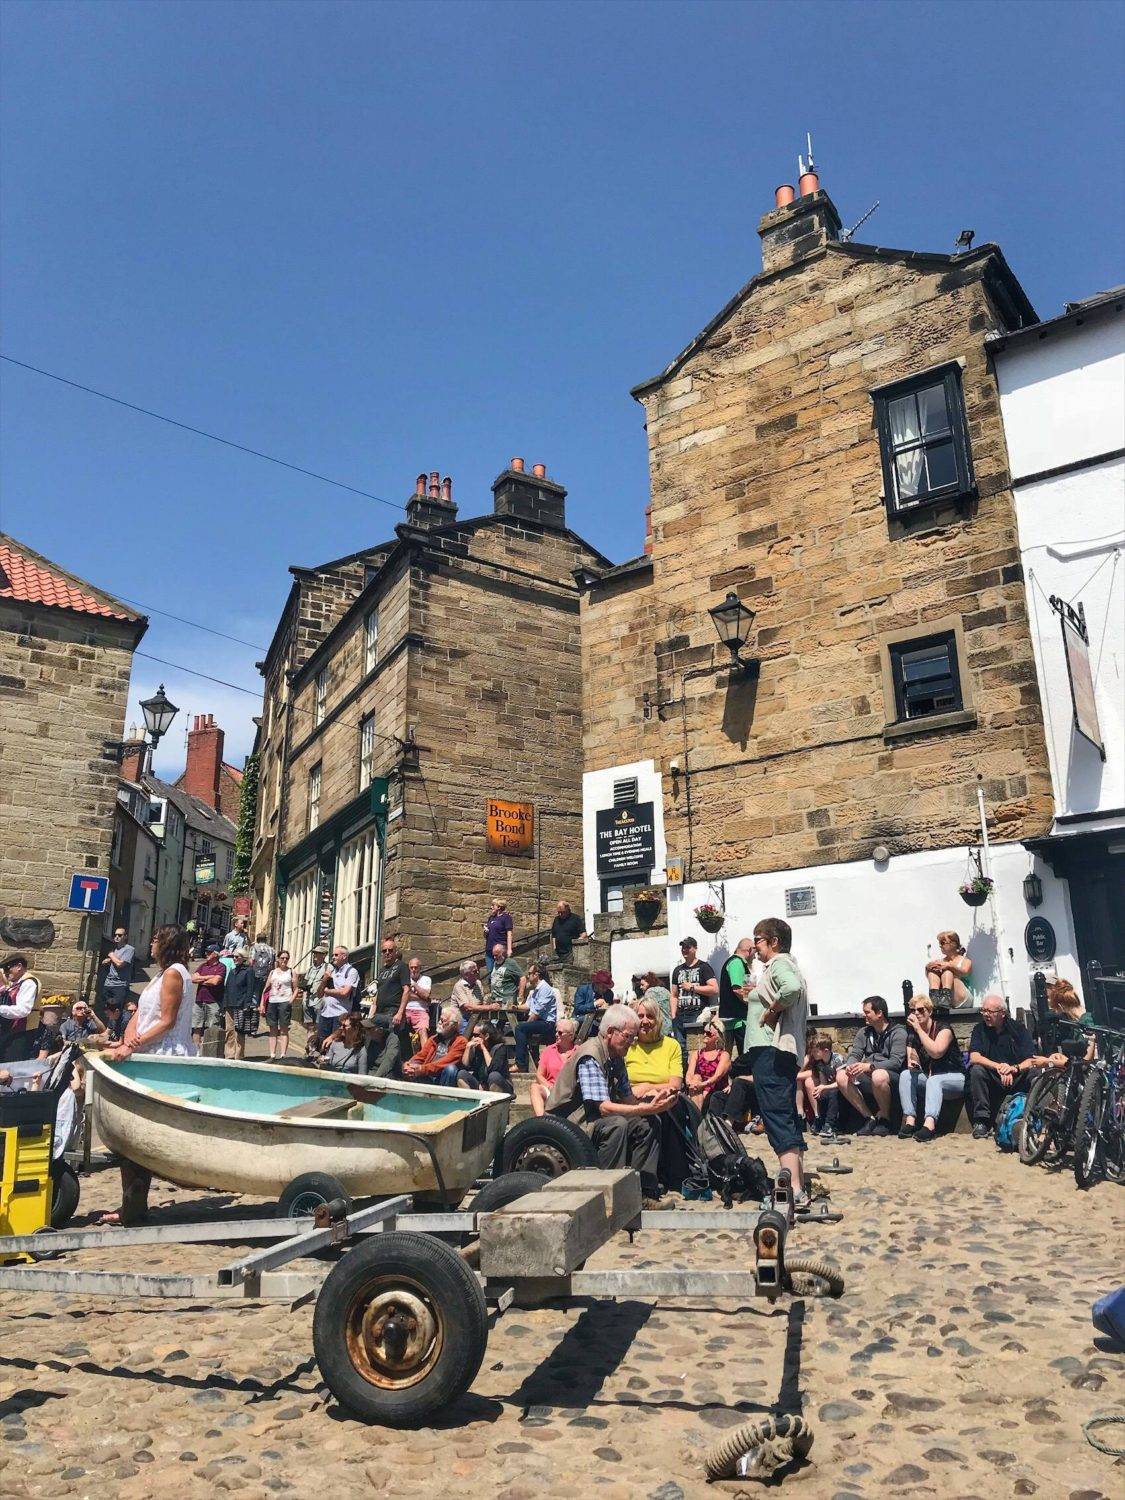 Busy day in Robin Hoods Bay, North Yorkshire